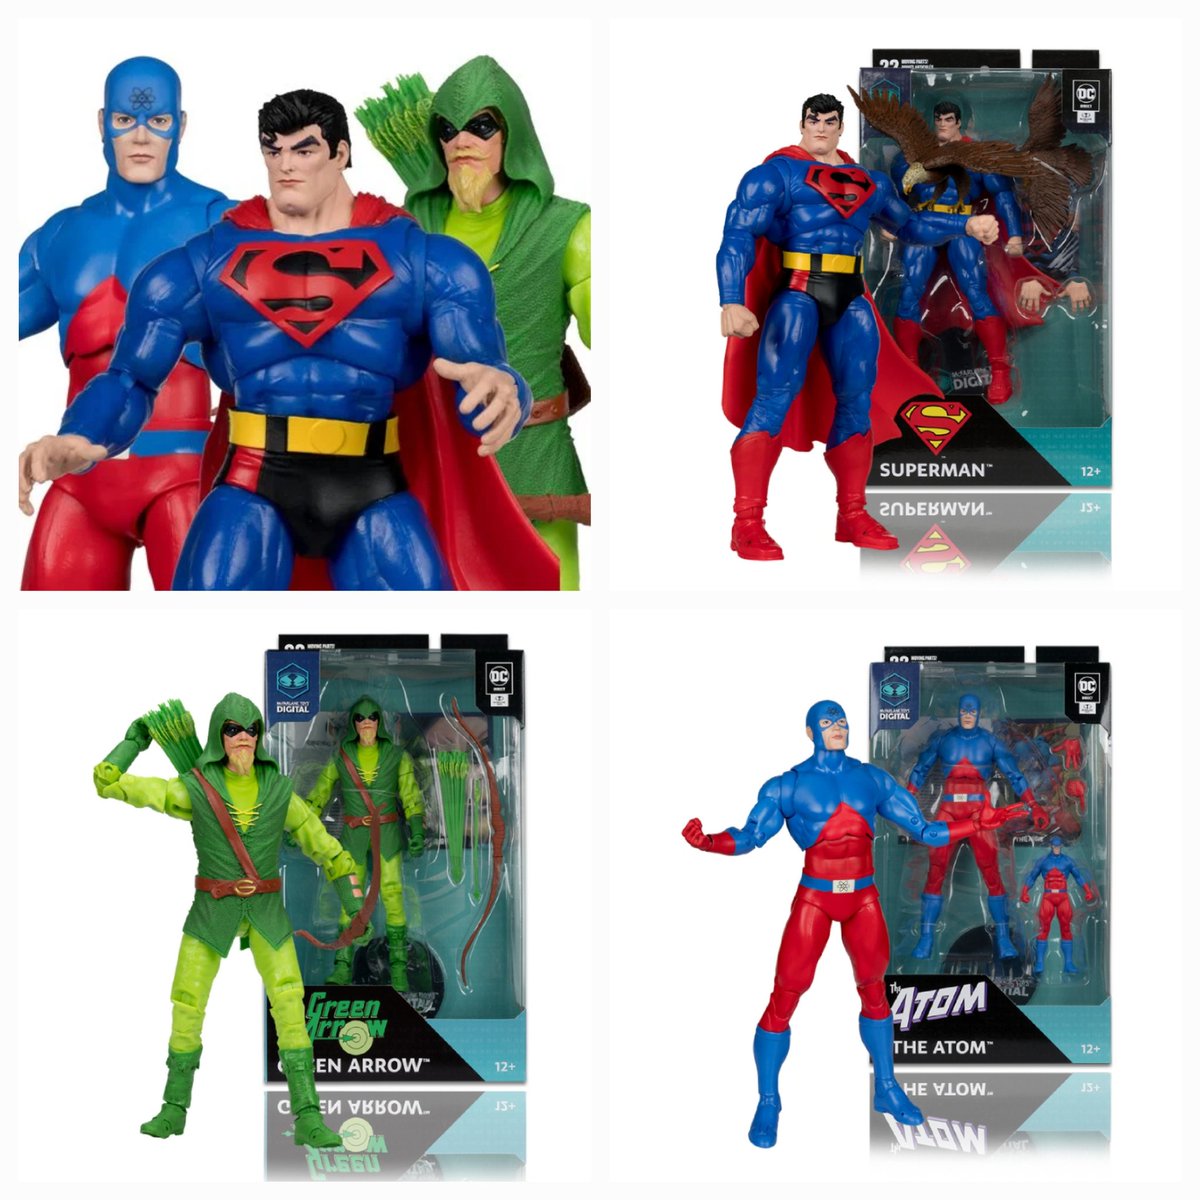 ICYMI ⚠️💥#UPDATE'D ALERT💥✨️ #Statoversians! 👁🌛👁 🫶 Mcfarlane Toys The Atom, Superman, & Green Arrow PHYGITAL figures are NOW up for on Amazon for ONLY ($24.99 each)! #McFarlaneToys #toynews TSO'VIN!! Green Arrow - amzn.to/3US5myJ The Atom -